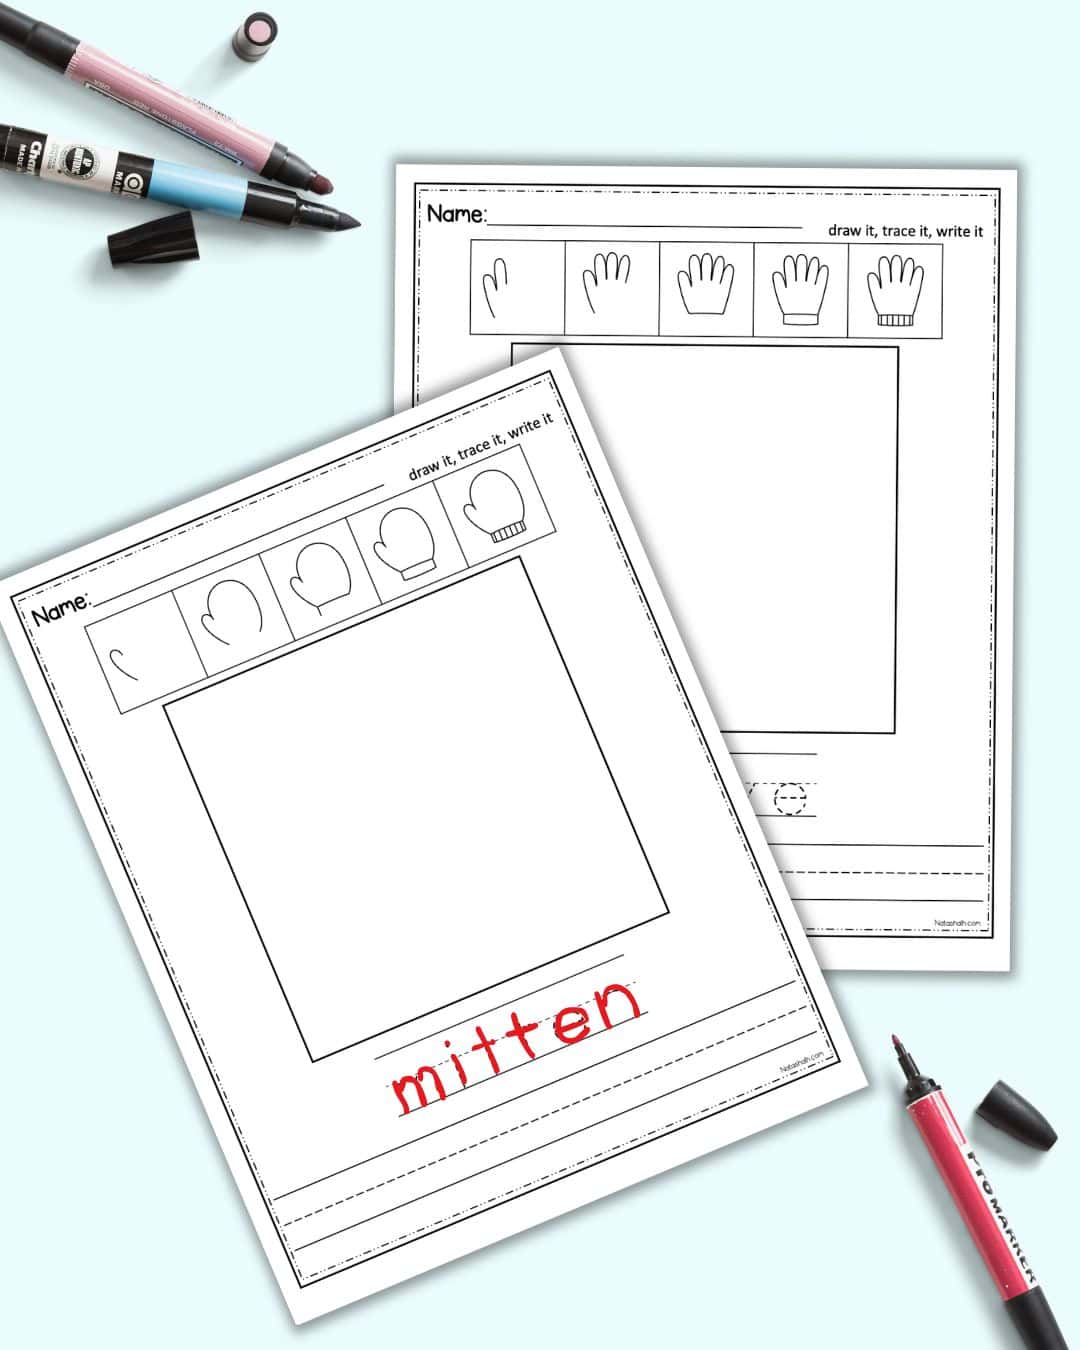 A directed drawing worksheet with a mitten and the word "mitten" grades over a dotted trading font